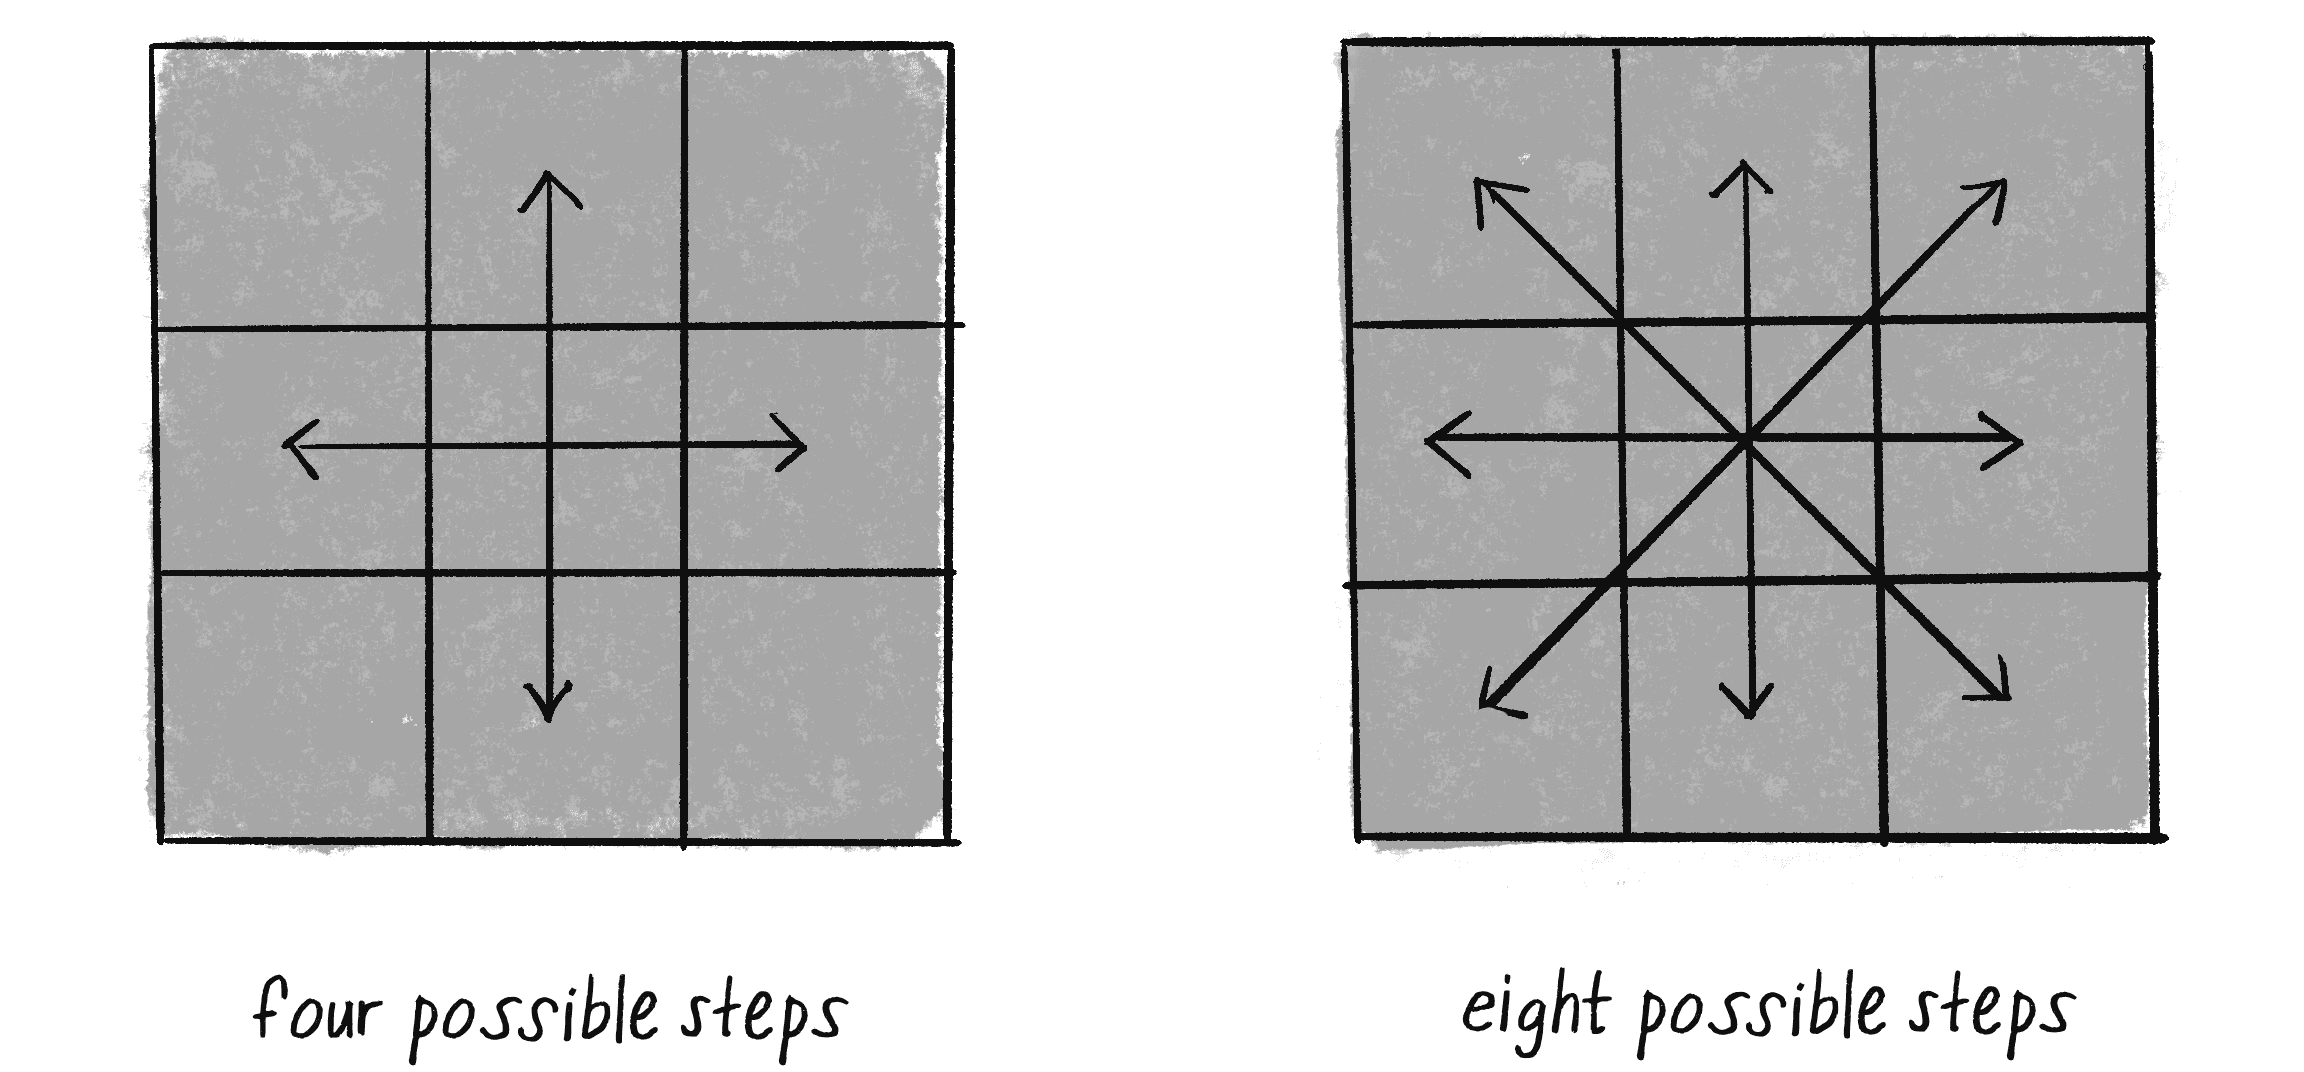 Figure 0.1: The steps of a random walker, with and without diagonals